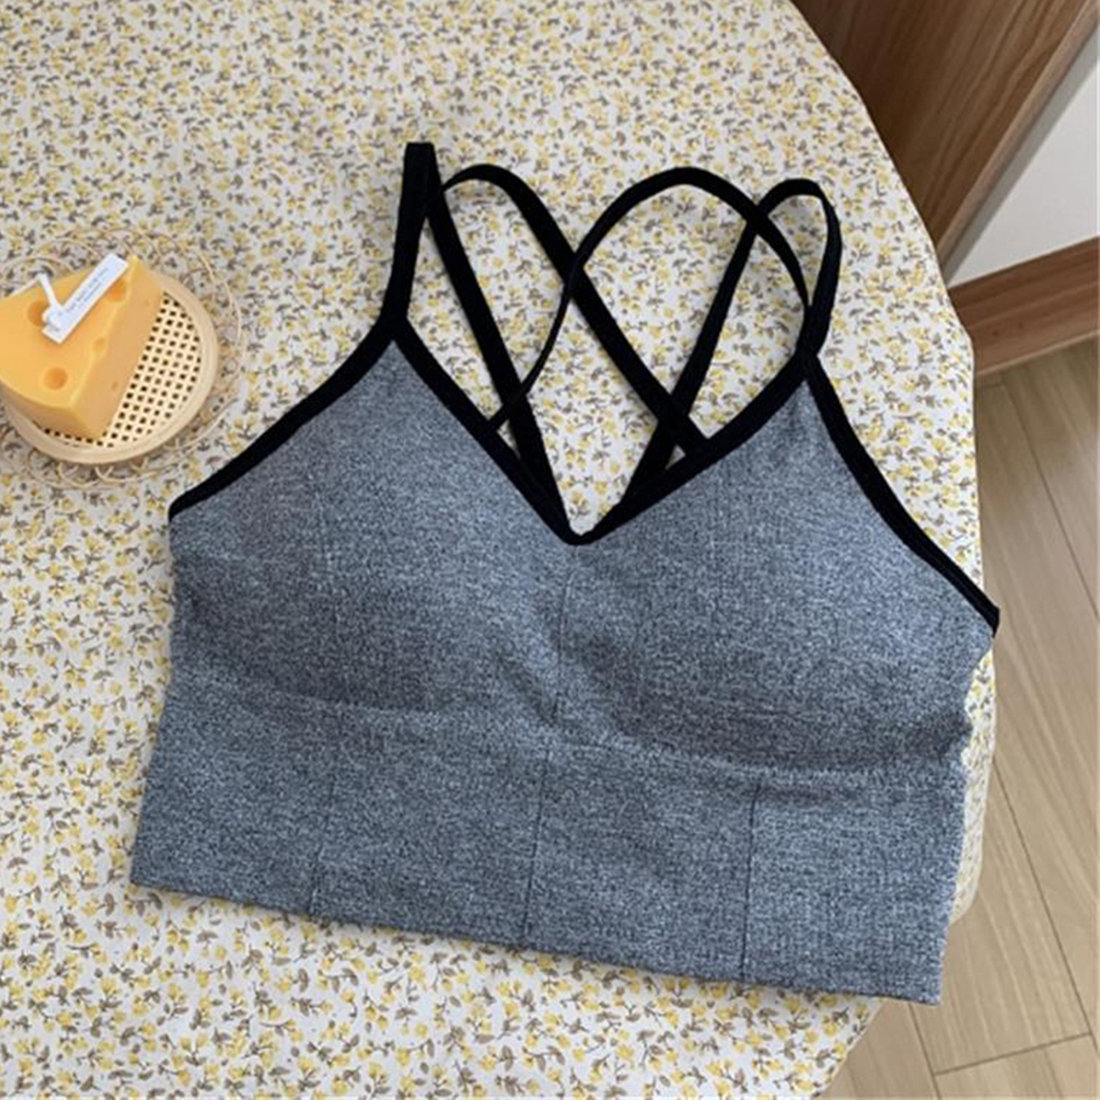 Fitness Sports Women Bra Femme Padded Underwear Crop Tops Ladies Push Up Solid Cross Back Yoga Running Gym Training Workout